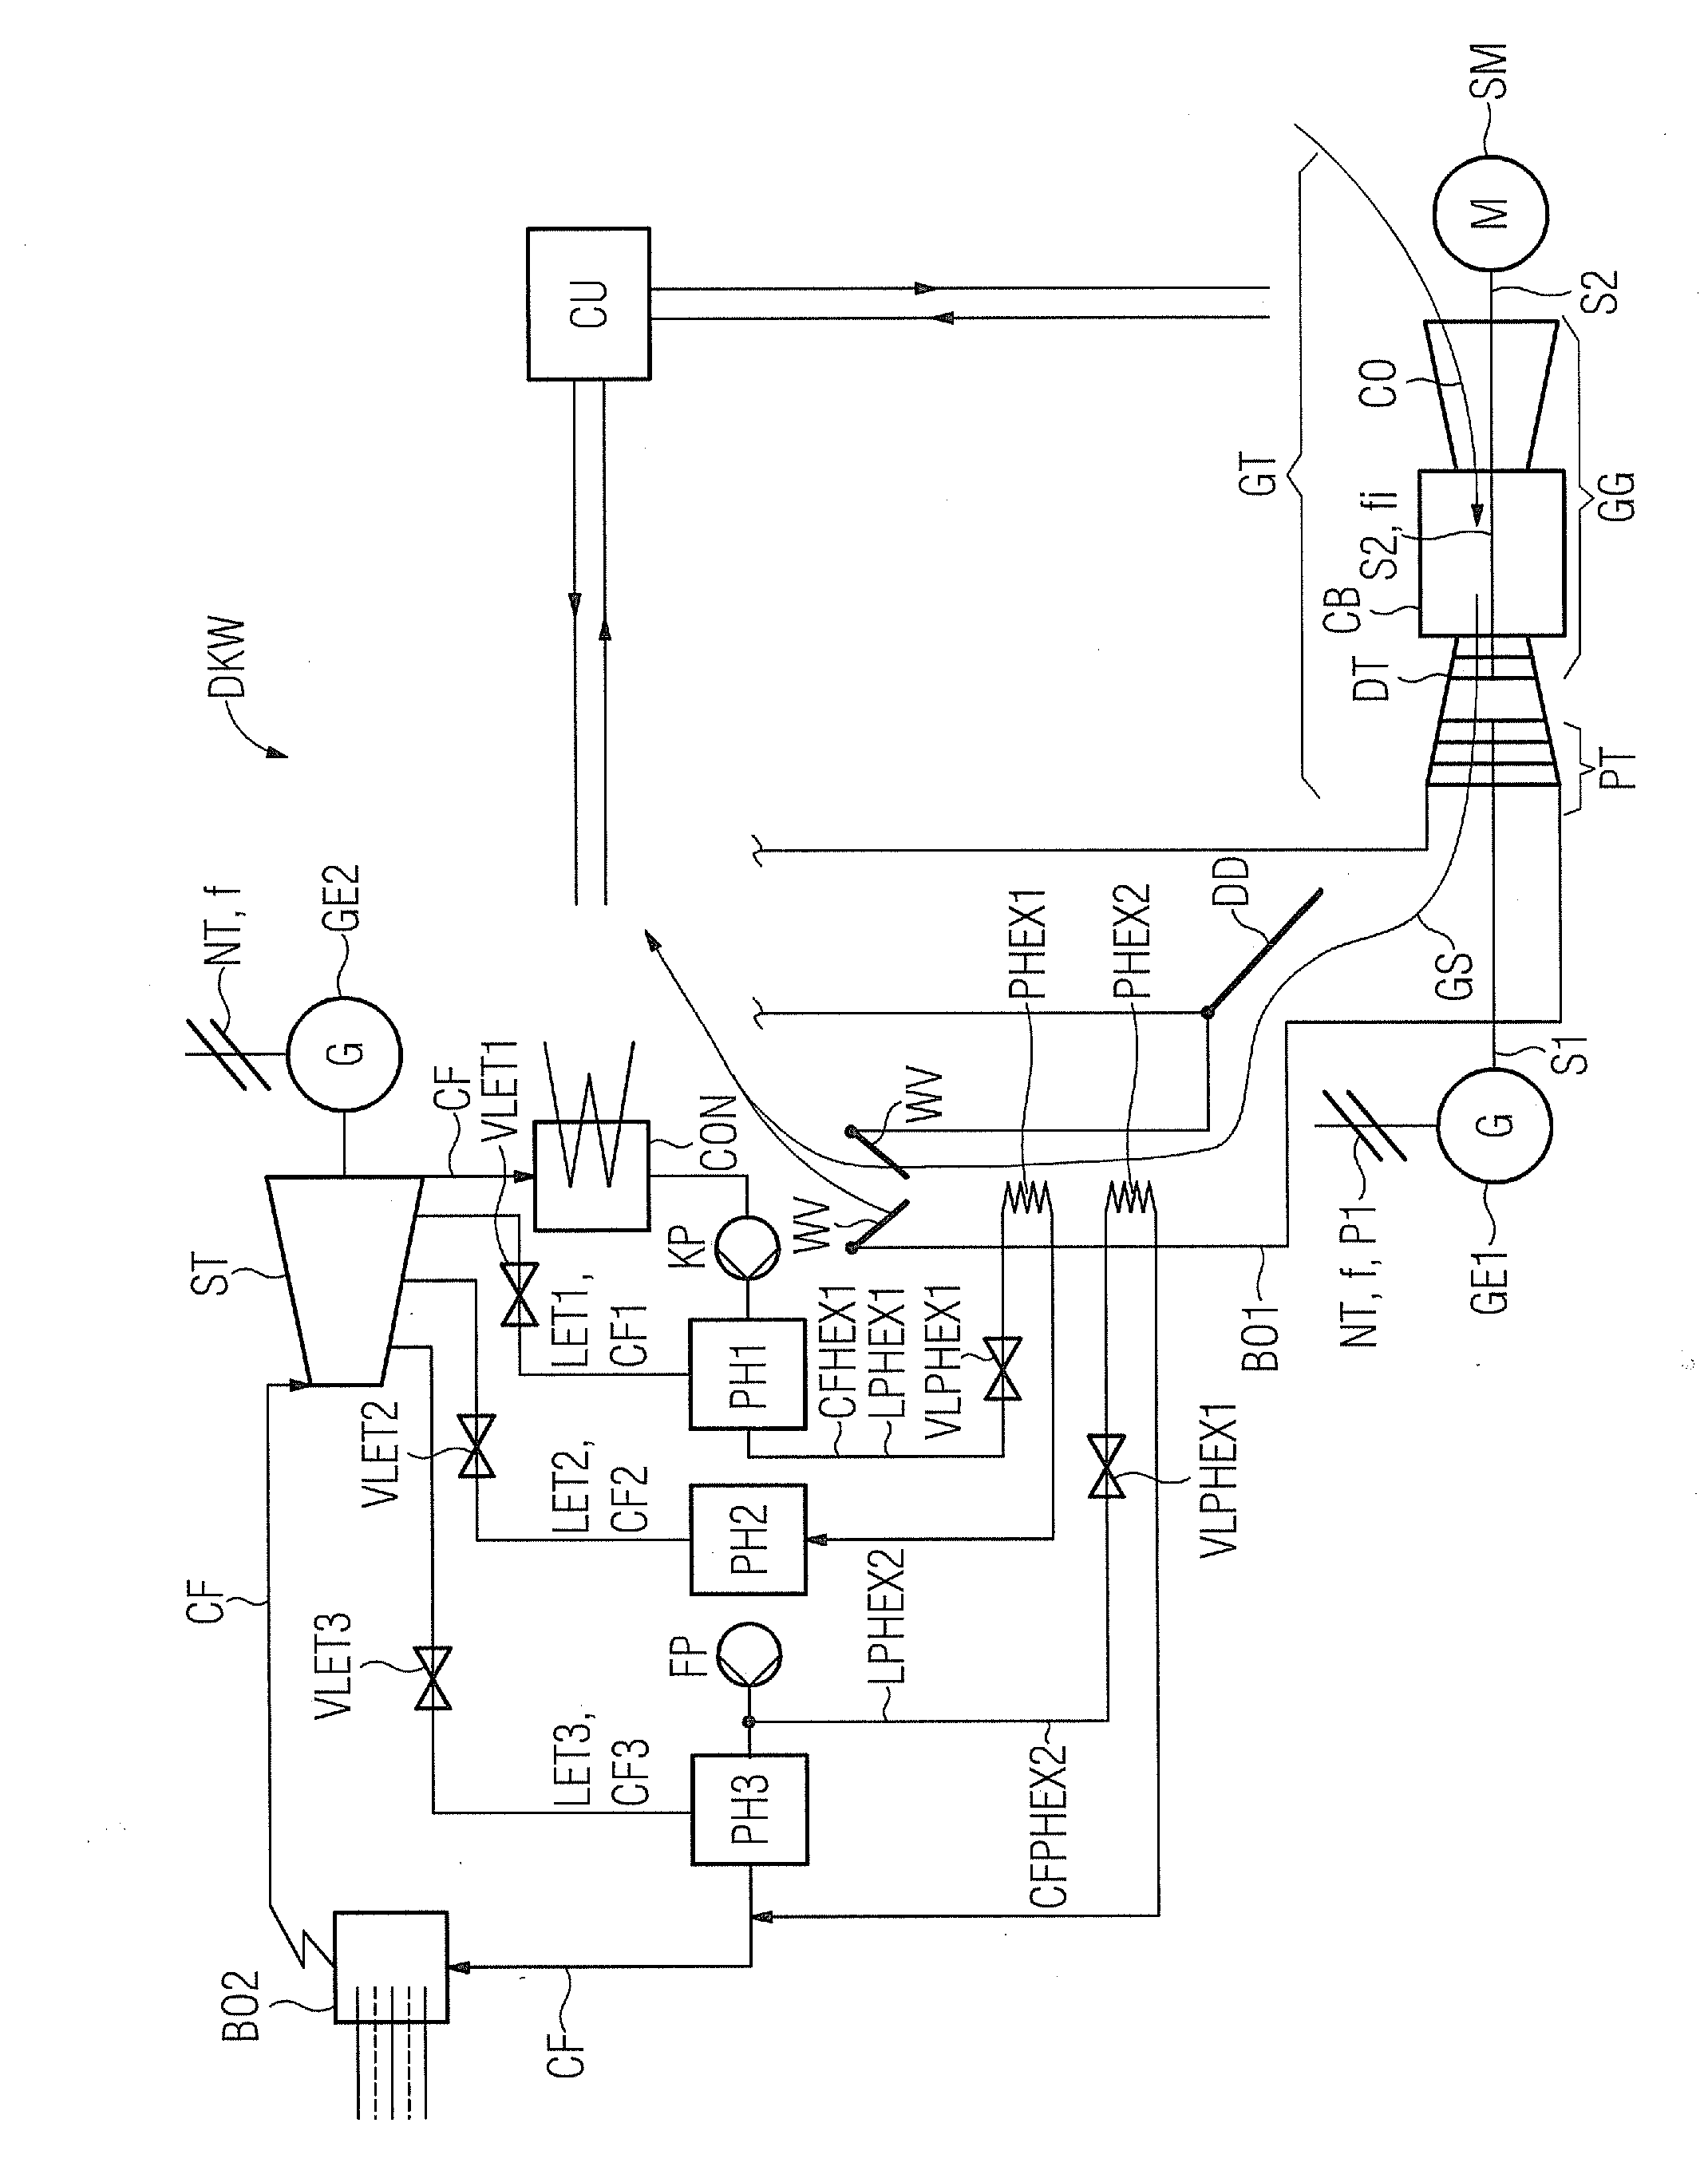 Method for stabilization of the network frequency of an electrical power network